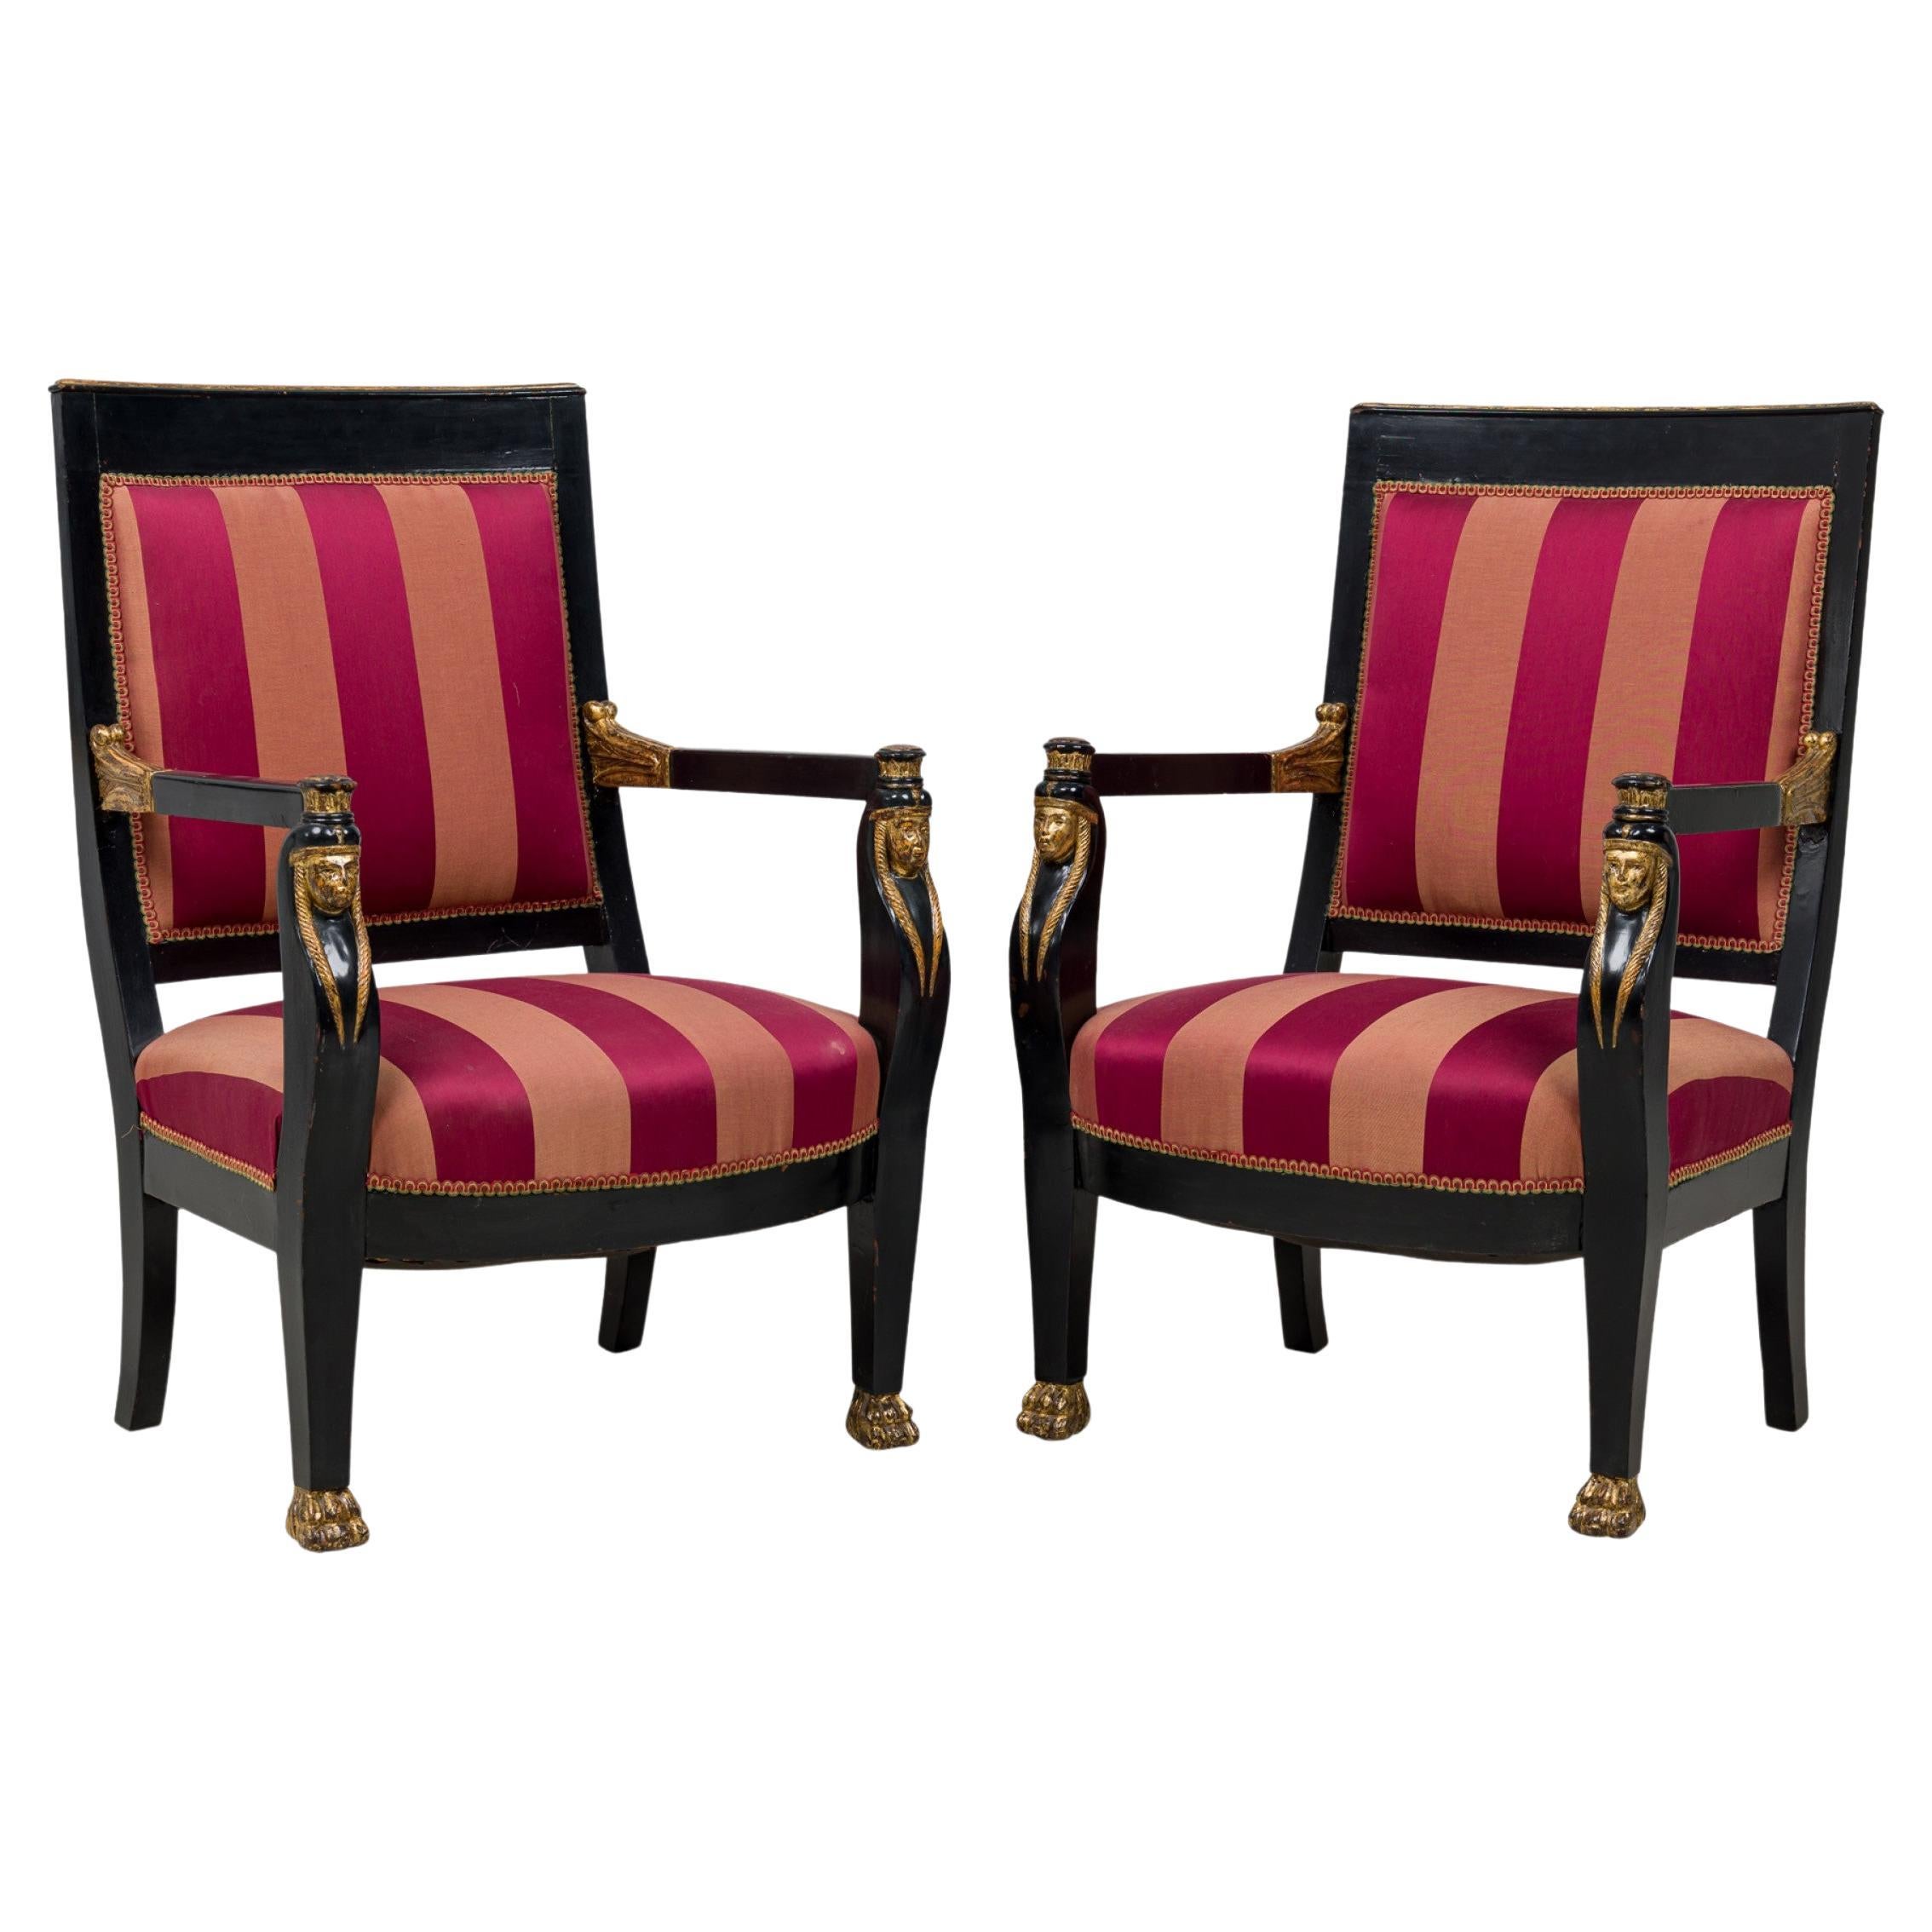 Pair of Italian Neo-Classic Ebonized and Parcel-Gilt Red Upholstered Armchairs For Sale